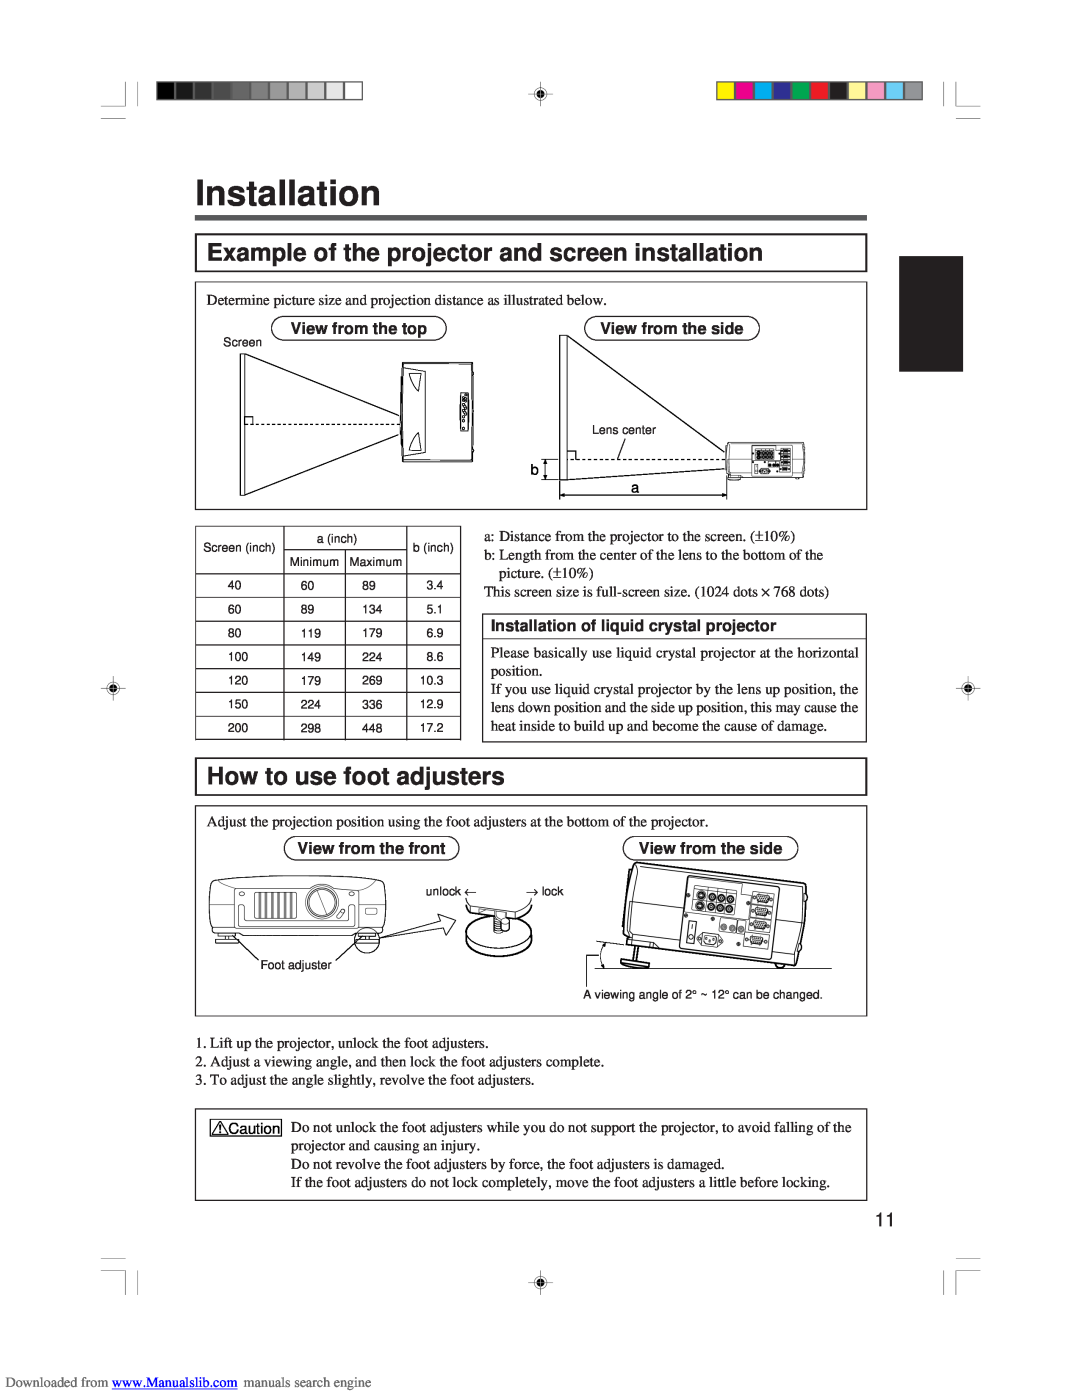 Hitachi CP-X955E specifications Installation, Example of the projector and screen installation, How to use foot adjusters 